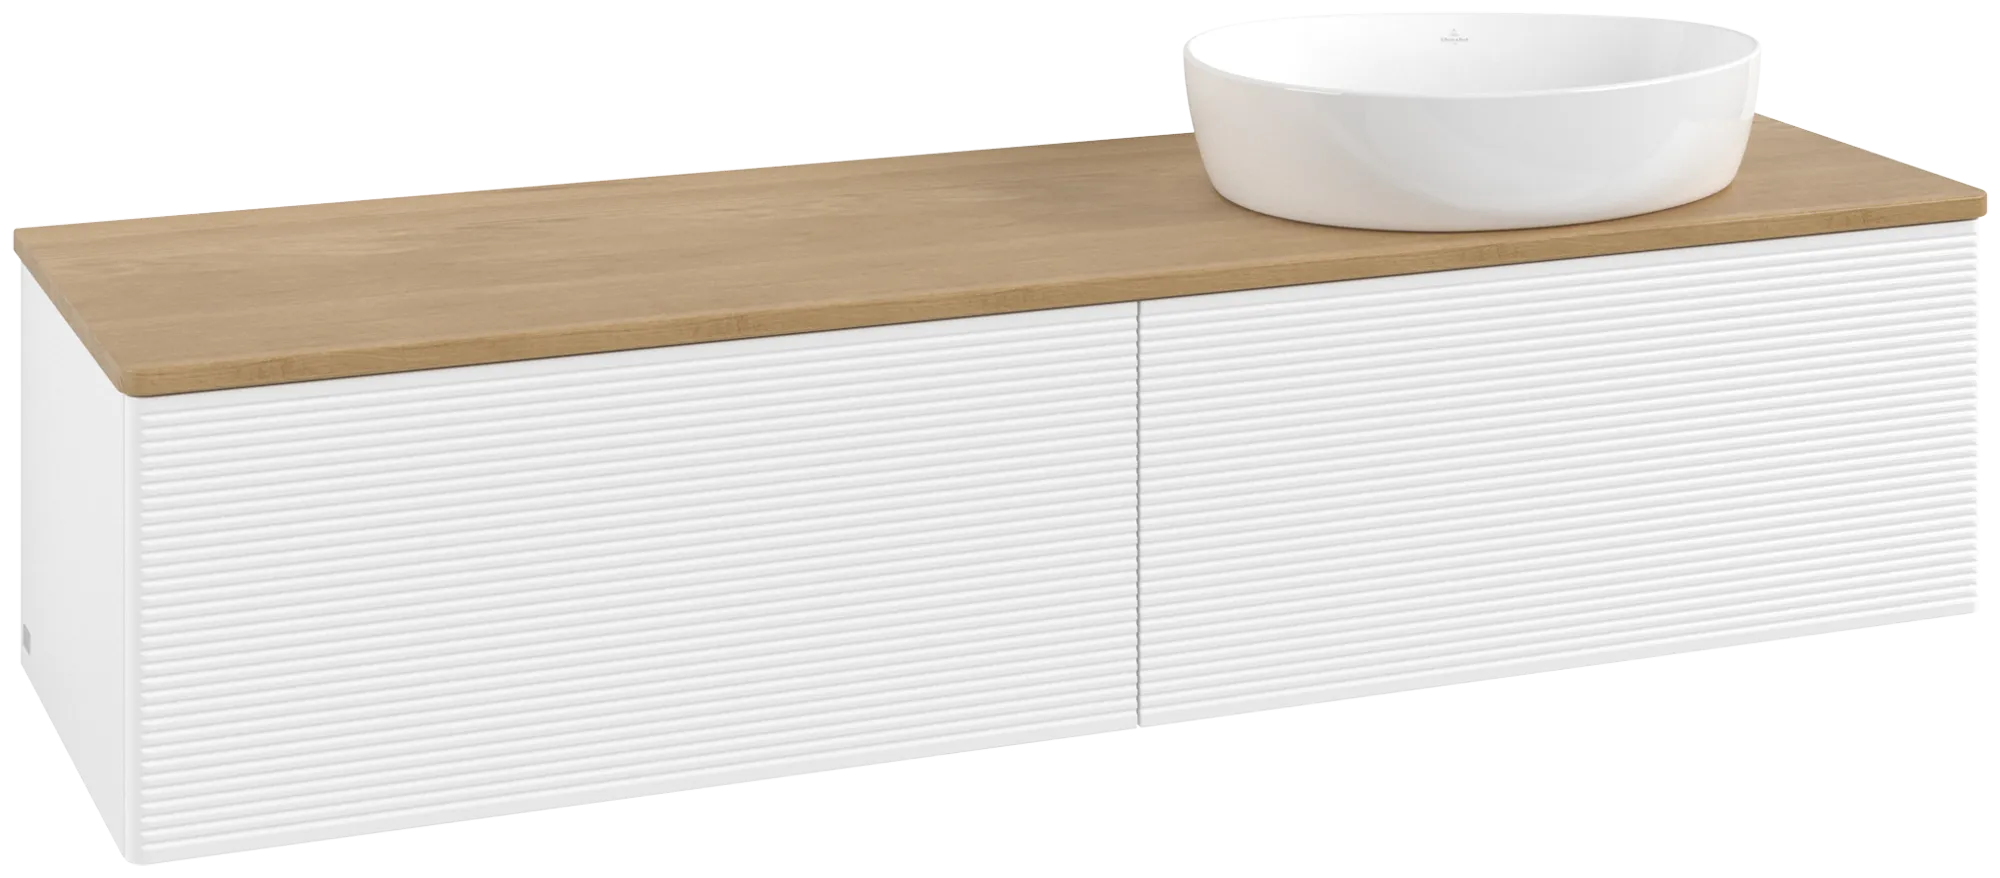 VILLEROY BOCH Antao Vanity unit, 2 pull-out compartments, 1600 x 360 x 500 mm, Front with grain texture, White Matt Lacquer / Honey Oak #K38111MT resmi